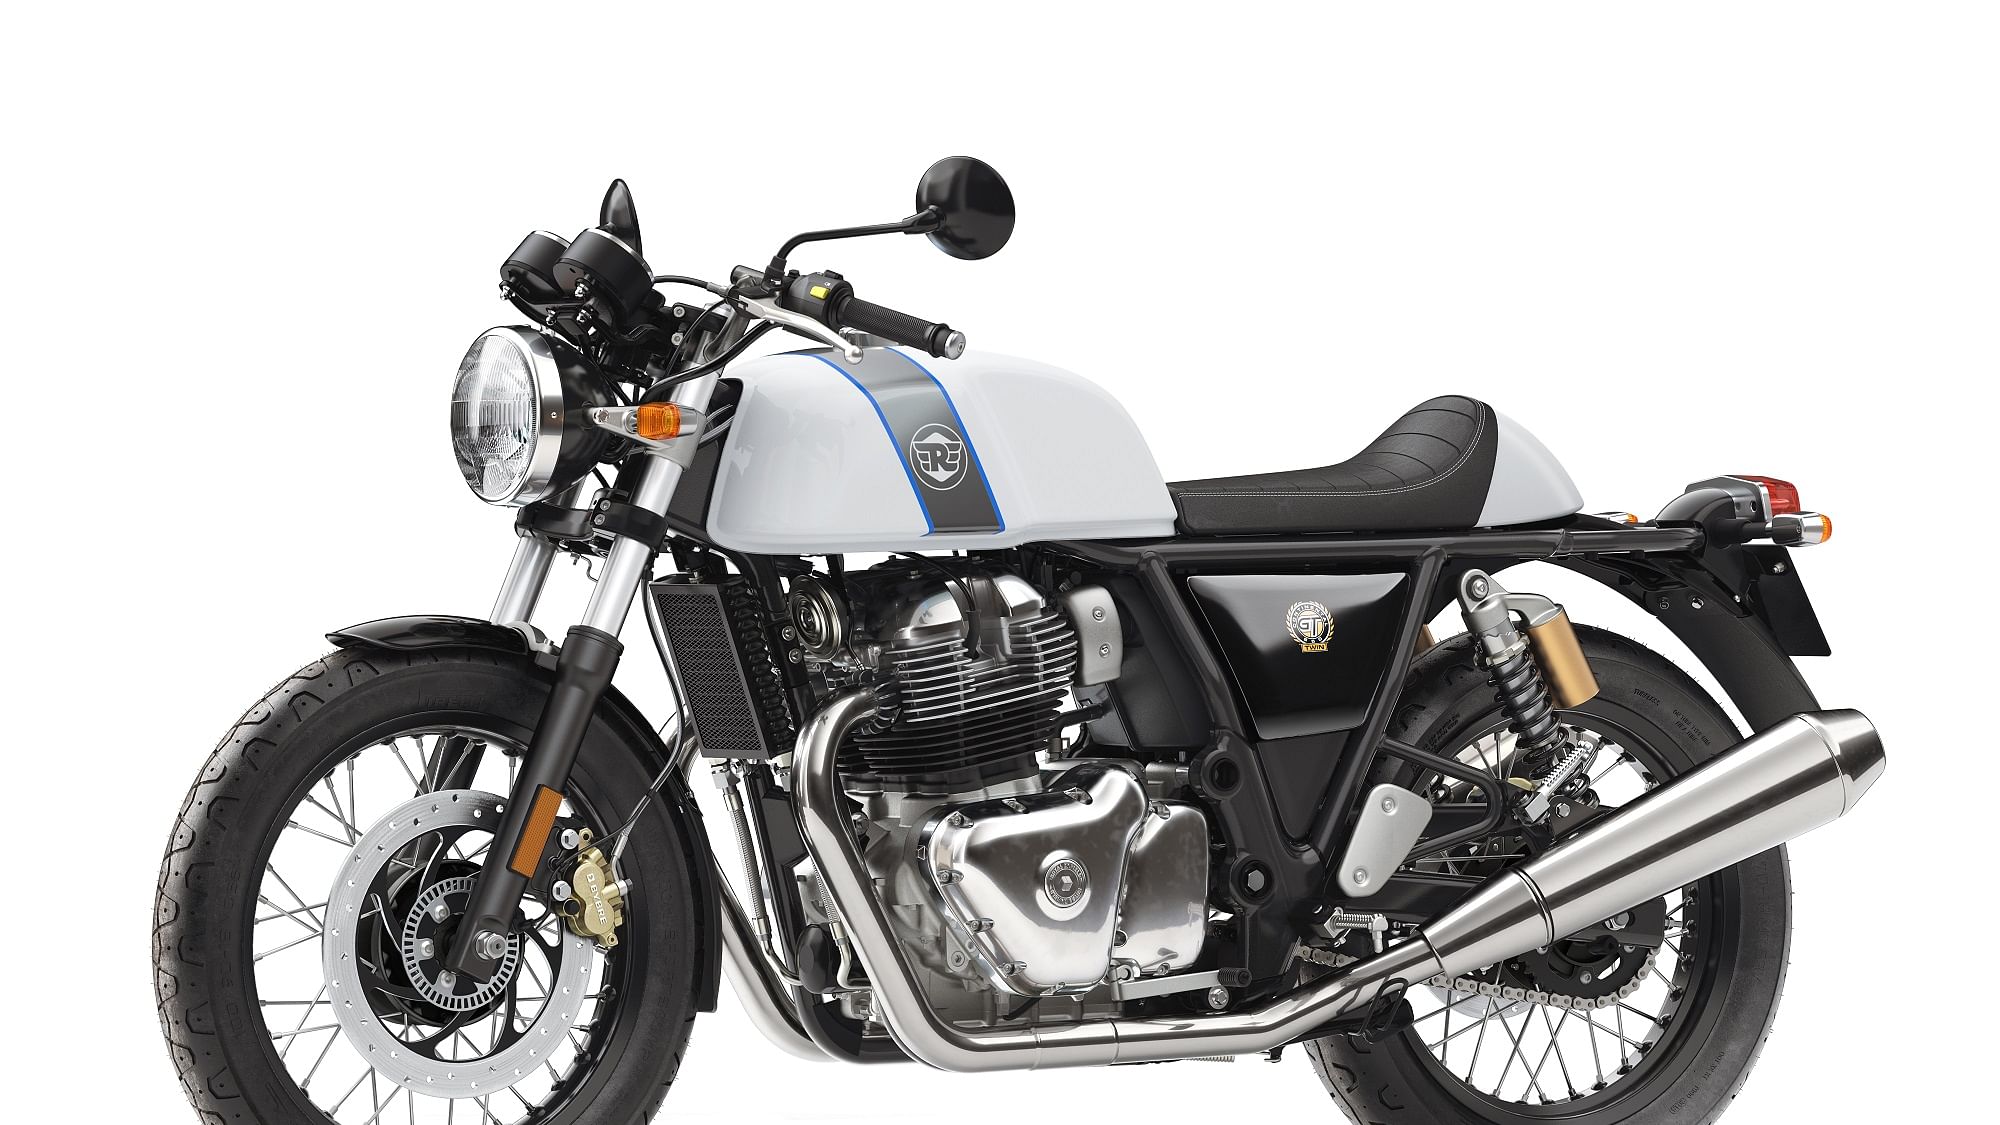 The Royal Enfield Continental GT 650 is built on the GT 535 chassis.